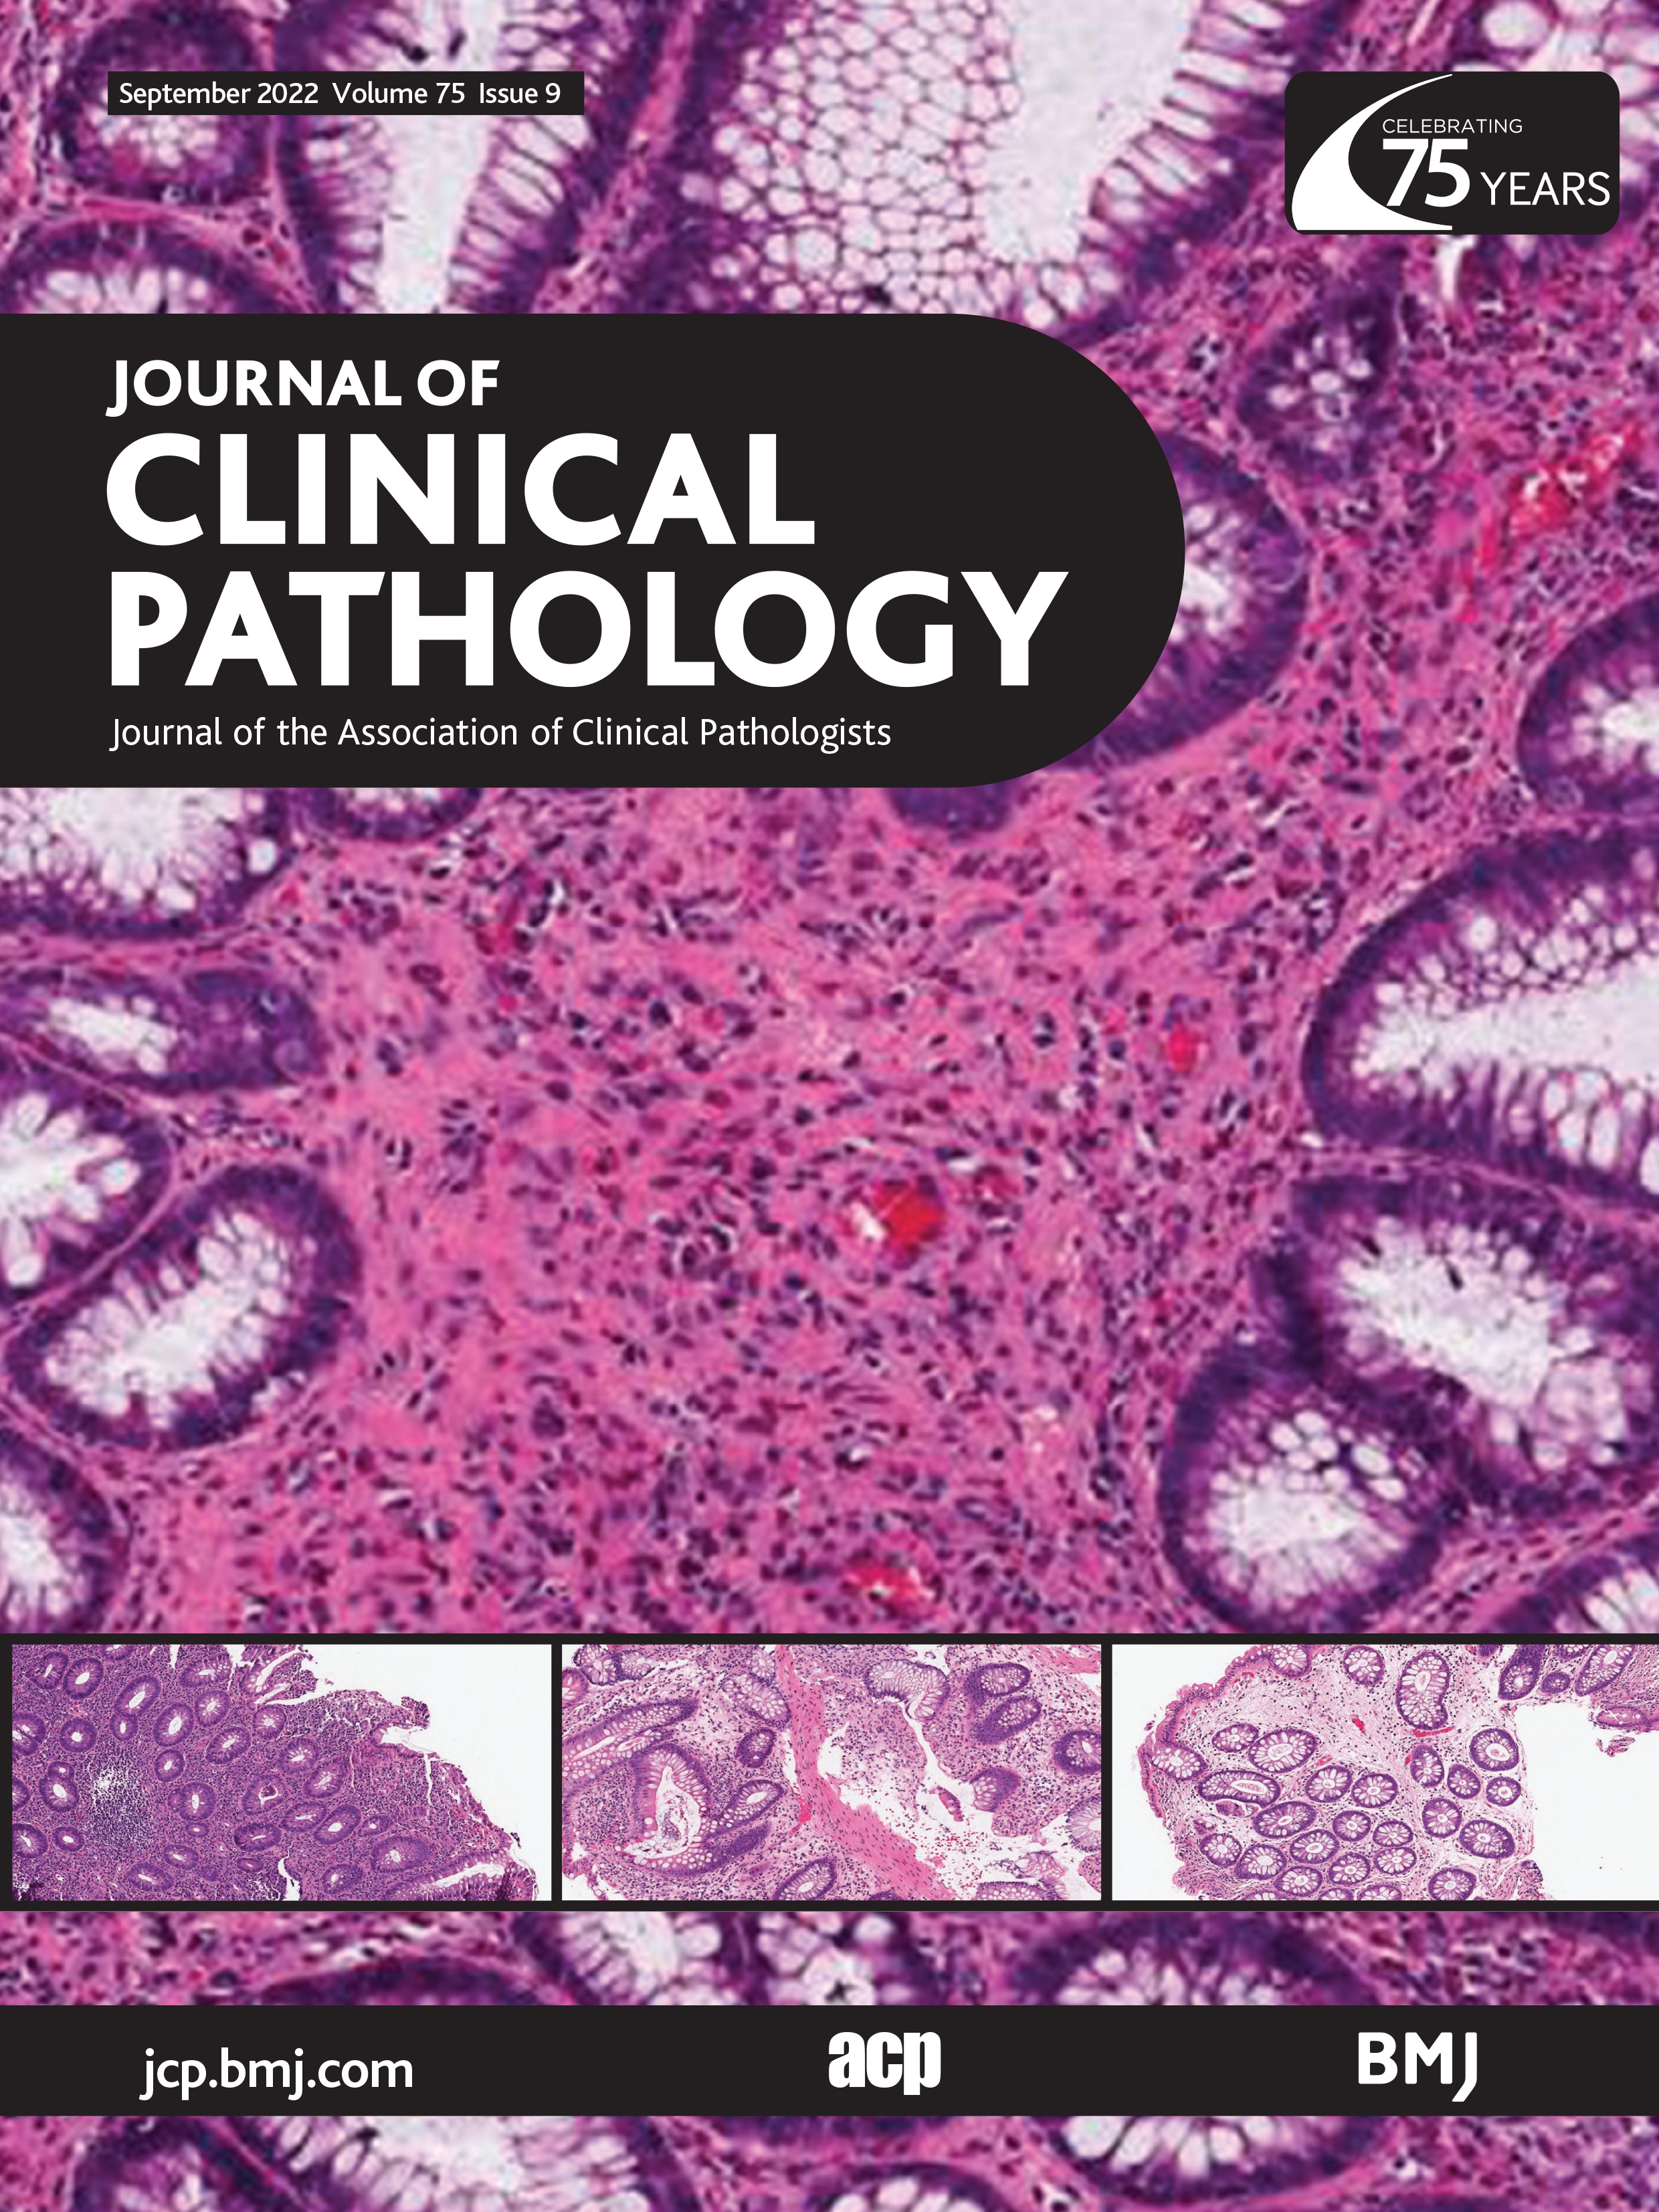 Proteomic characterisations of ulcerative colitis endoscopic biopsies associate with clinically relevant histological measurements of disease severity